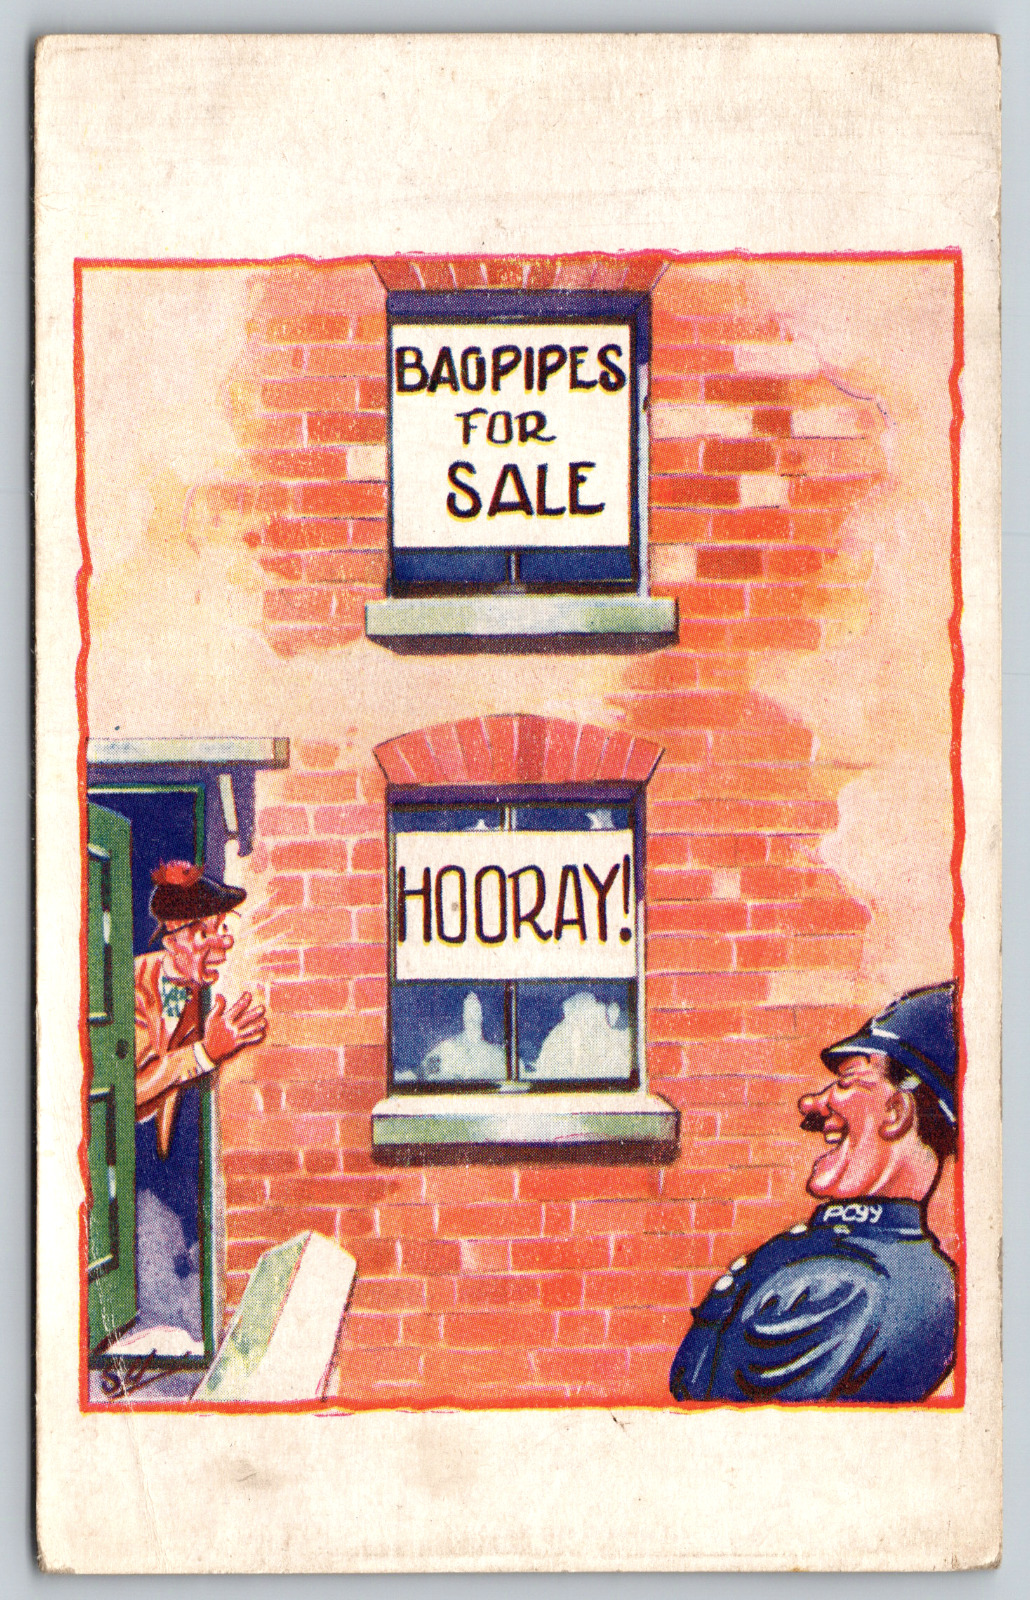 c1910s Bag Pipes For Sale Hooray Police Officer Laughing Vintage Postcard